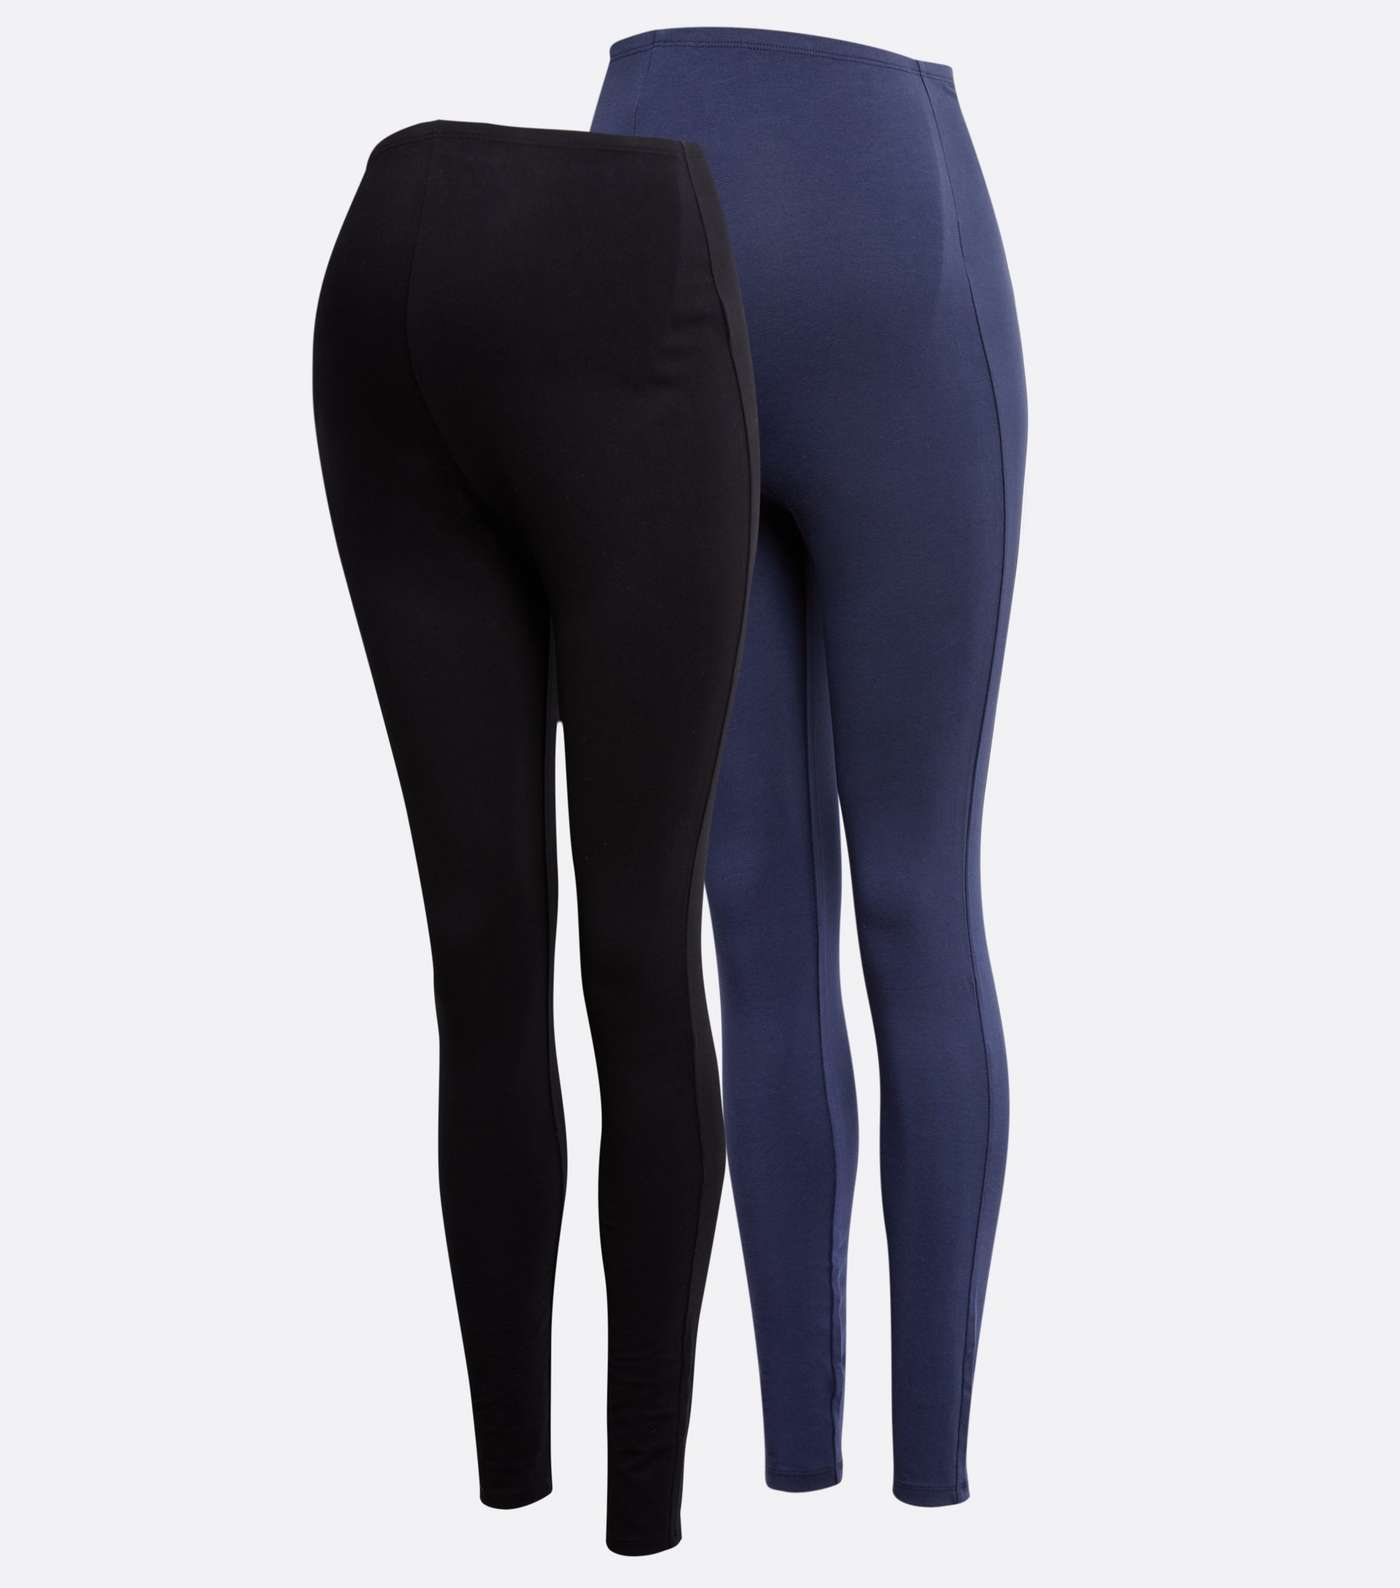 Maternity 2 Pack Navy and Black Jersey Leggings Image 5